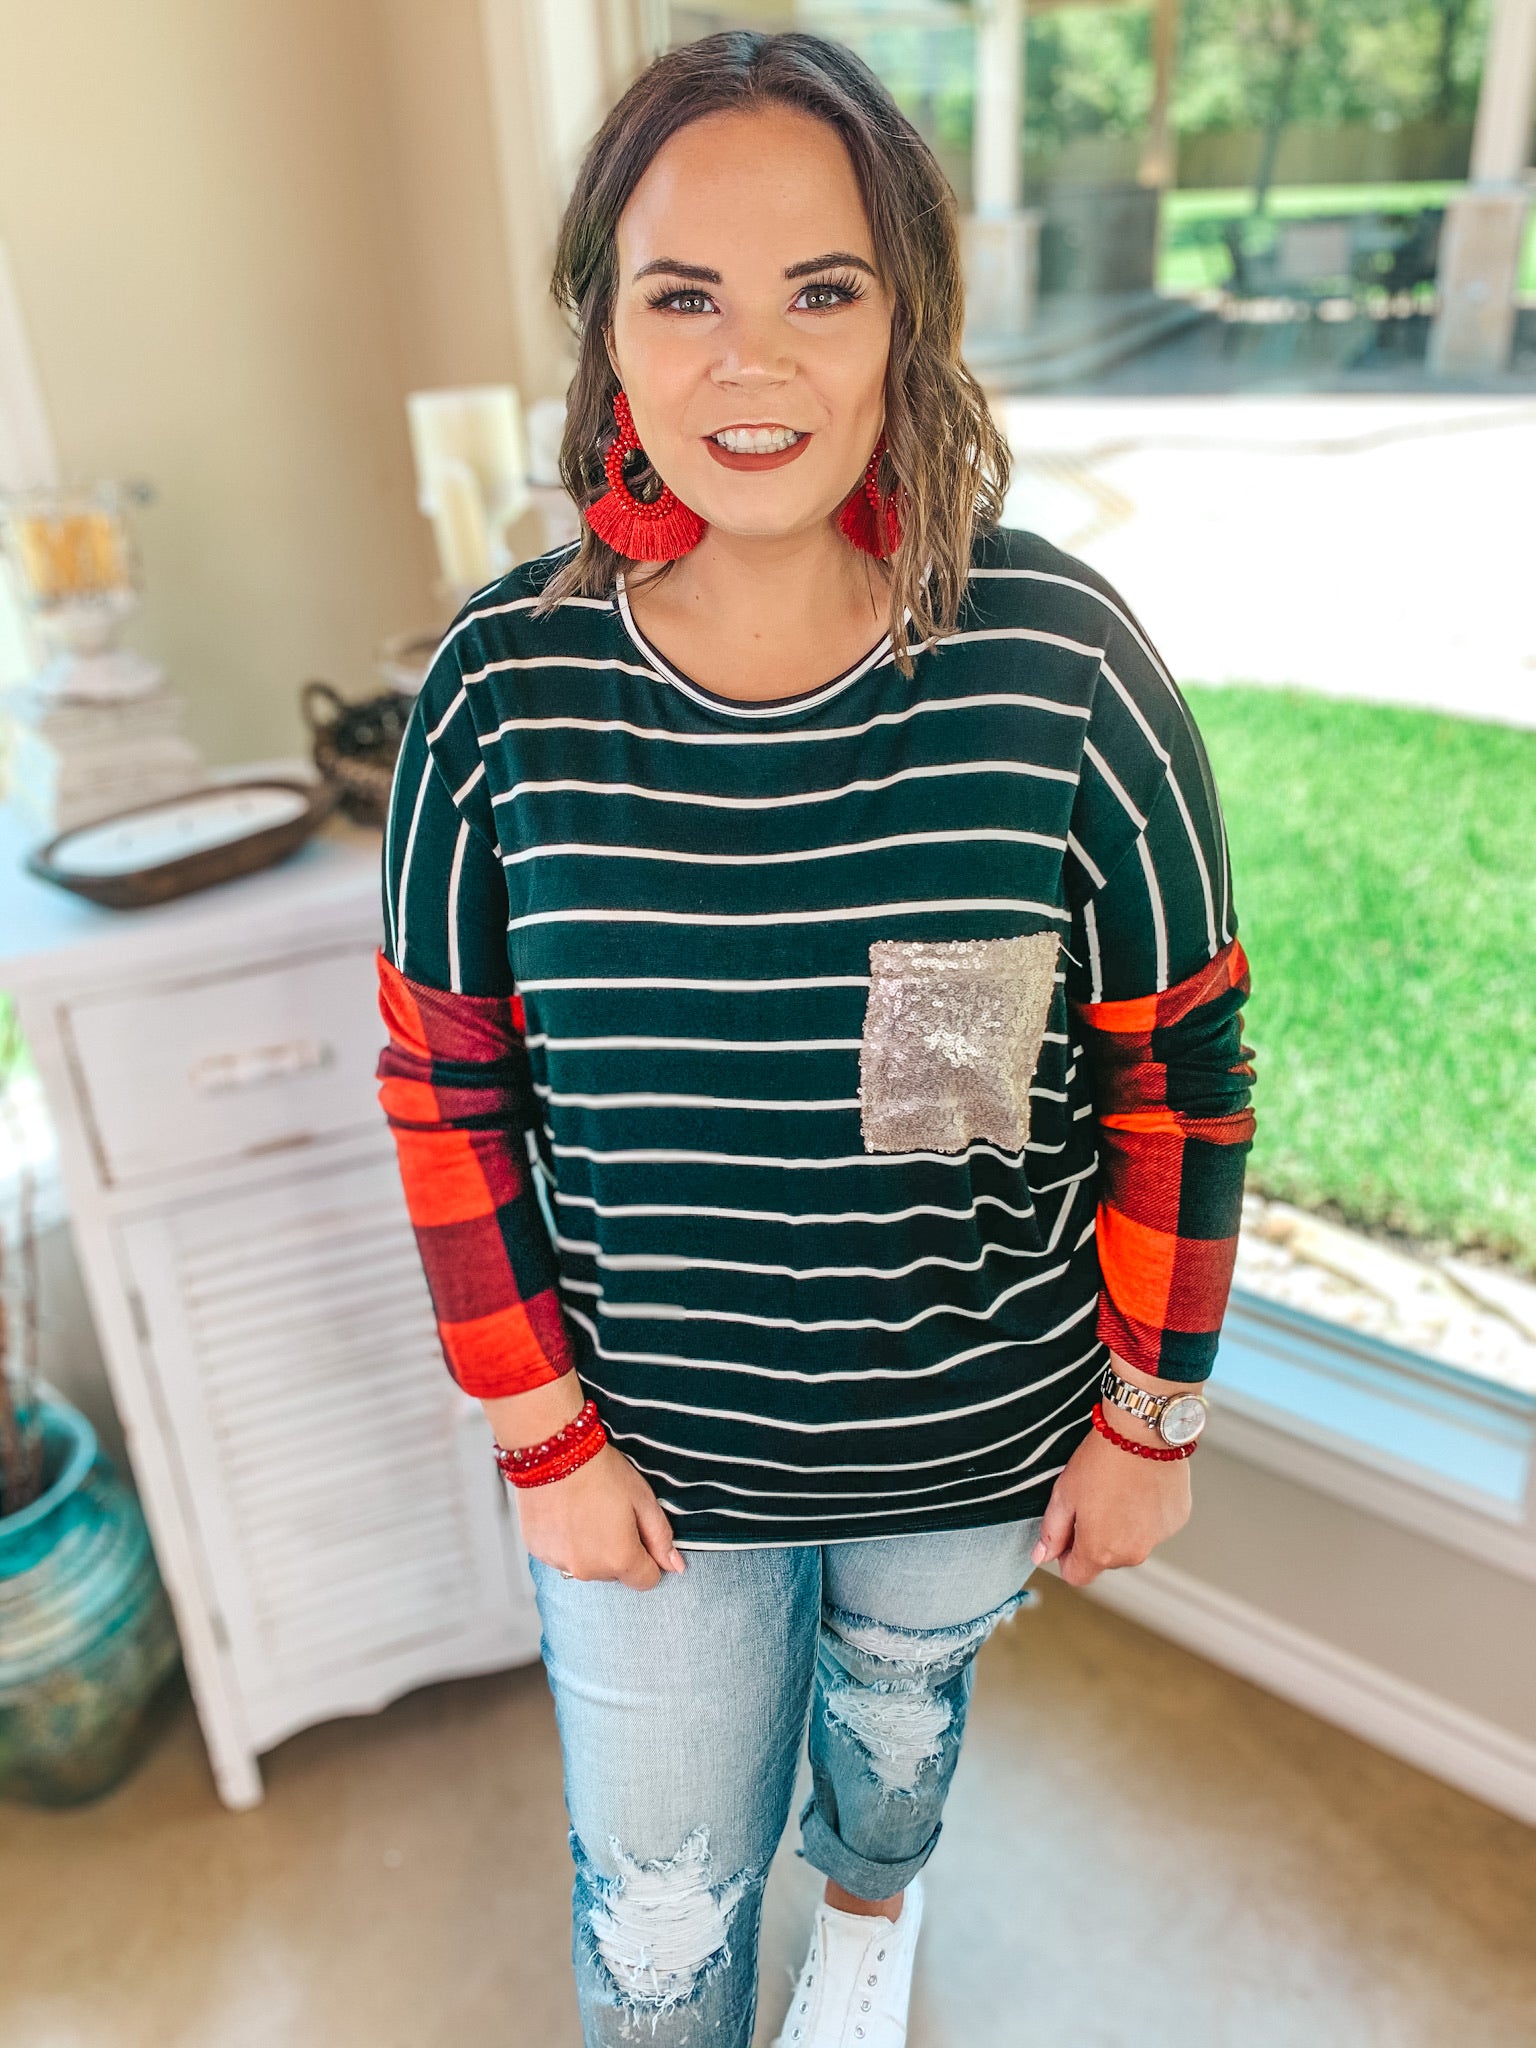 Plus Sizes | Just Getting Started Buffalo Plaid and Striped Pocket Top in Red and Black - Giddy Up Glamour Boutique